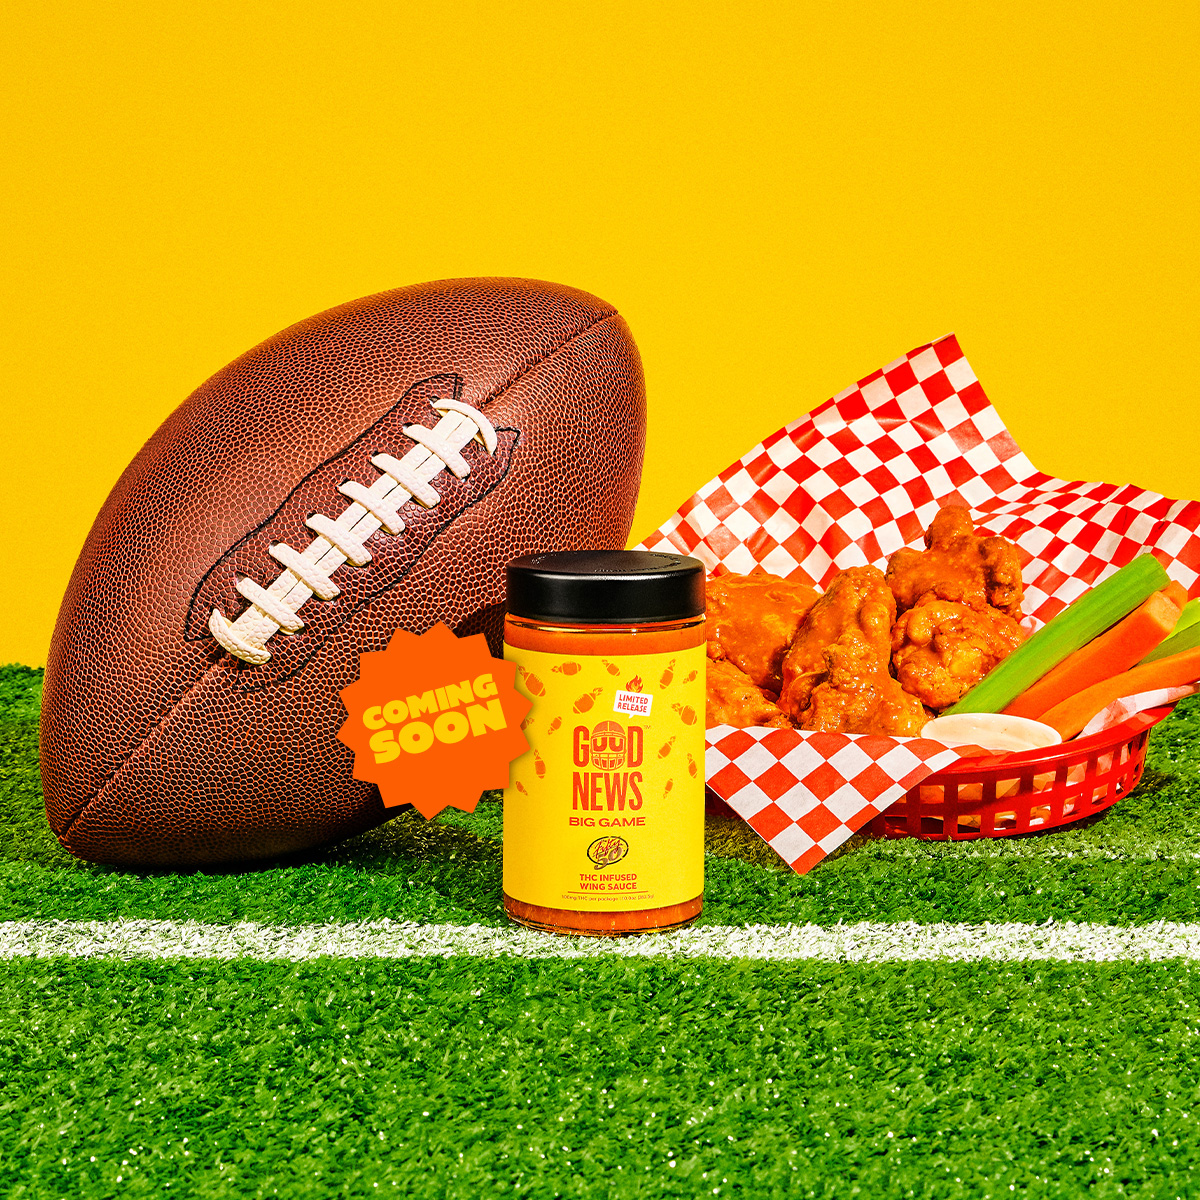 The Big Game deserves a Big Sauce. 🔥 Made with @TheFifty50's award-winning buffalo sauce and infused with 100mg of THC, Good News' new Big Game wing sauce is coming to Sunnyside dispensaries in Illinois this Friday.